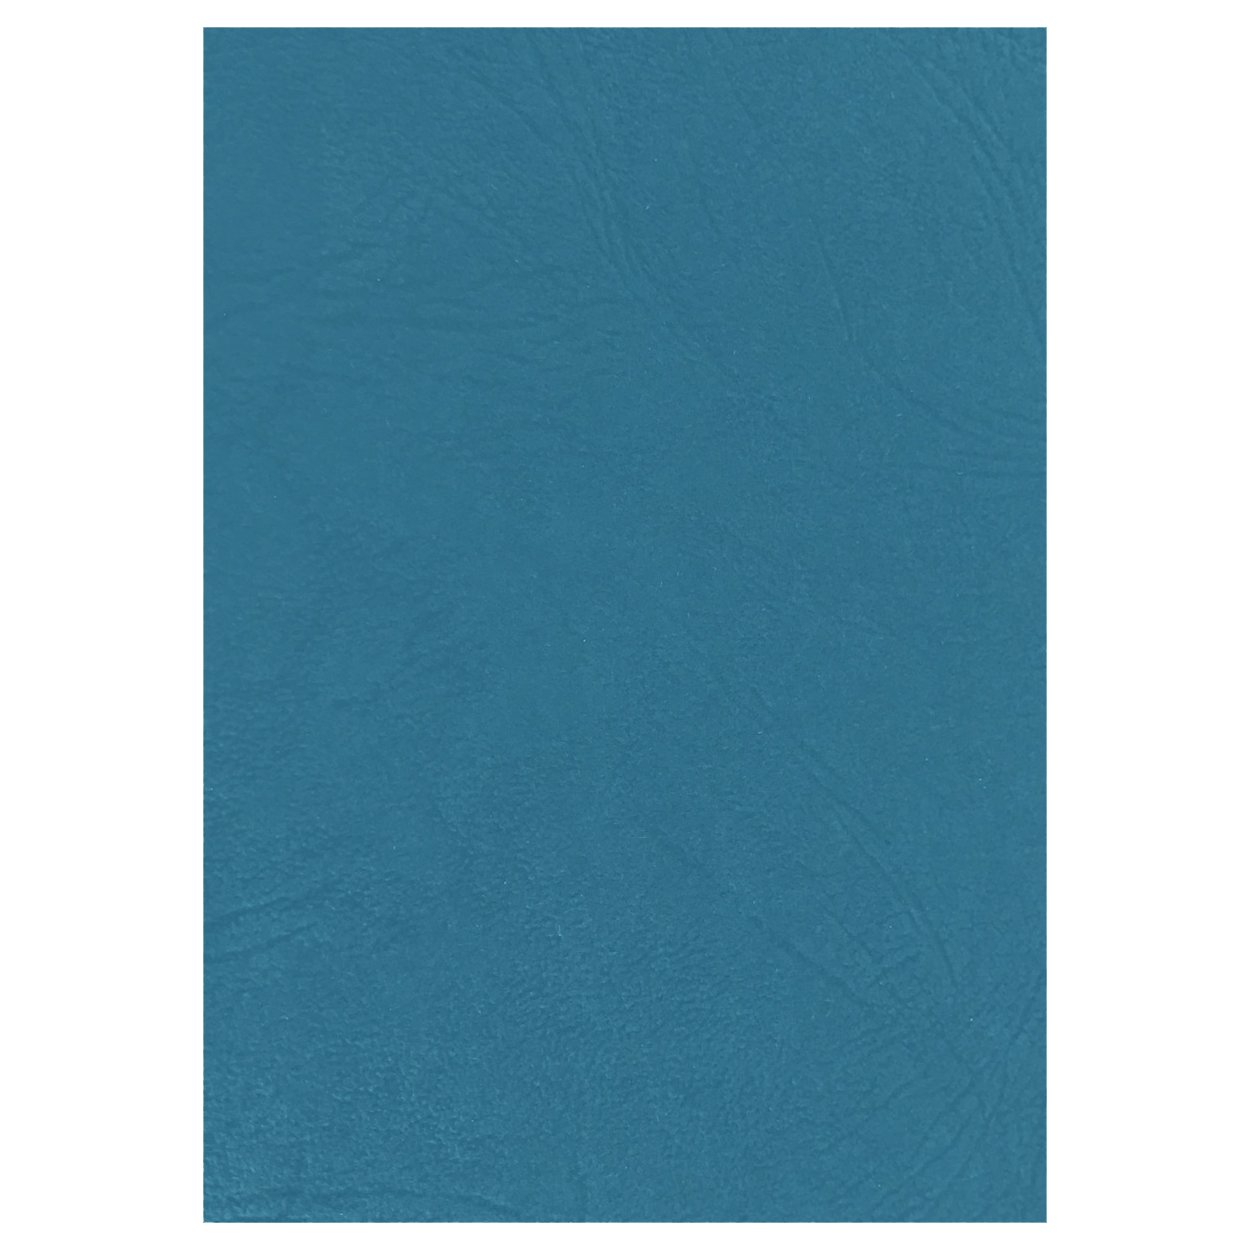 A4 Leathergrain Covers 250gsm - Light Blue (Pkt 100) - Click Image to Close